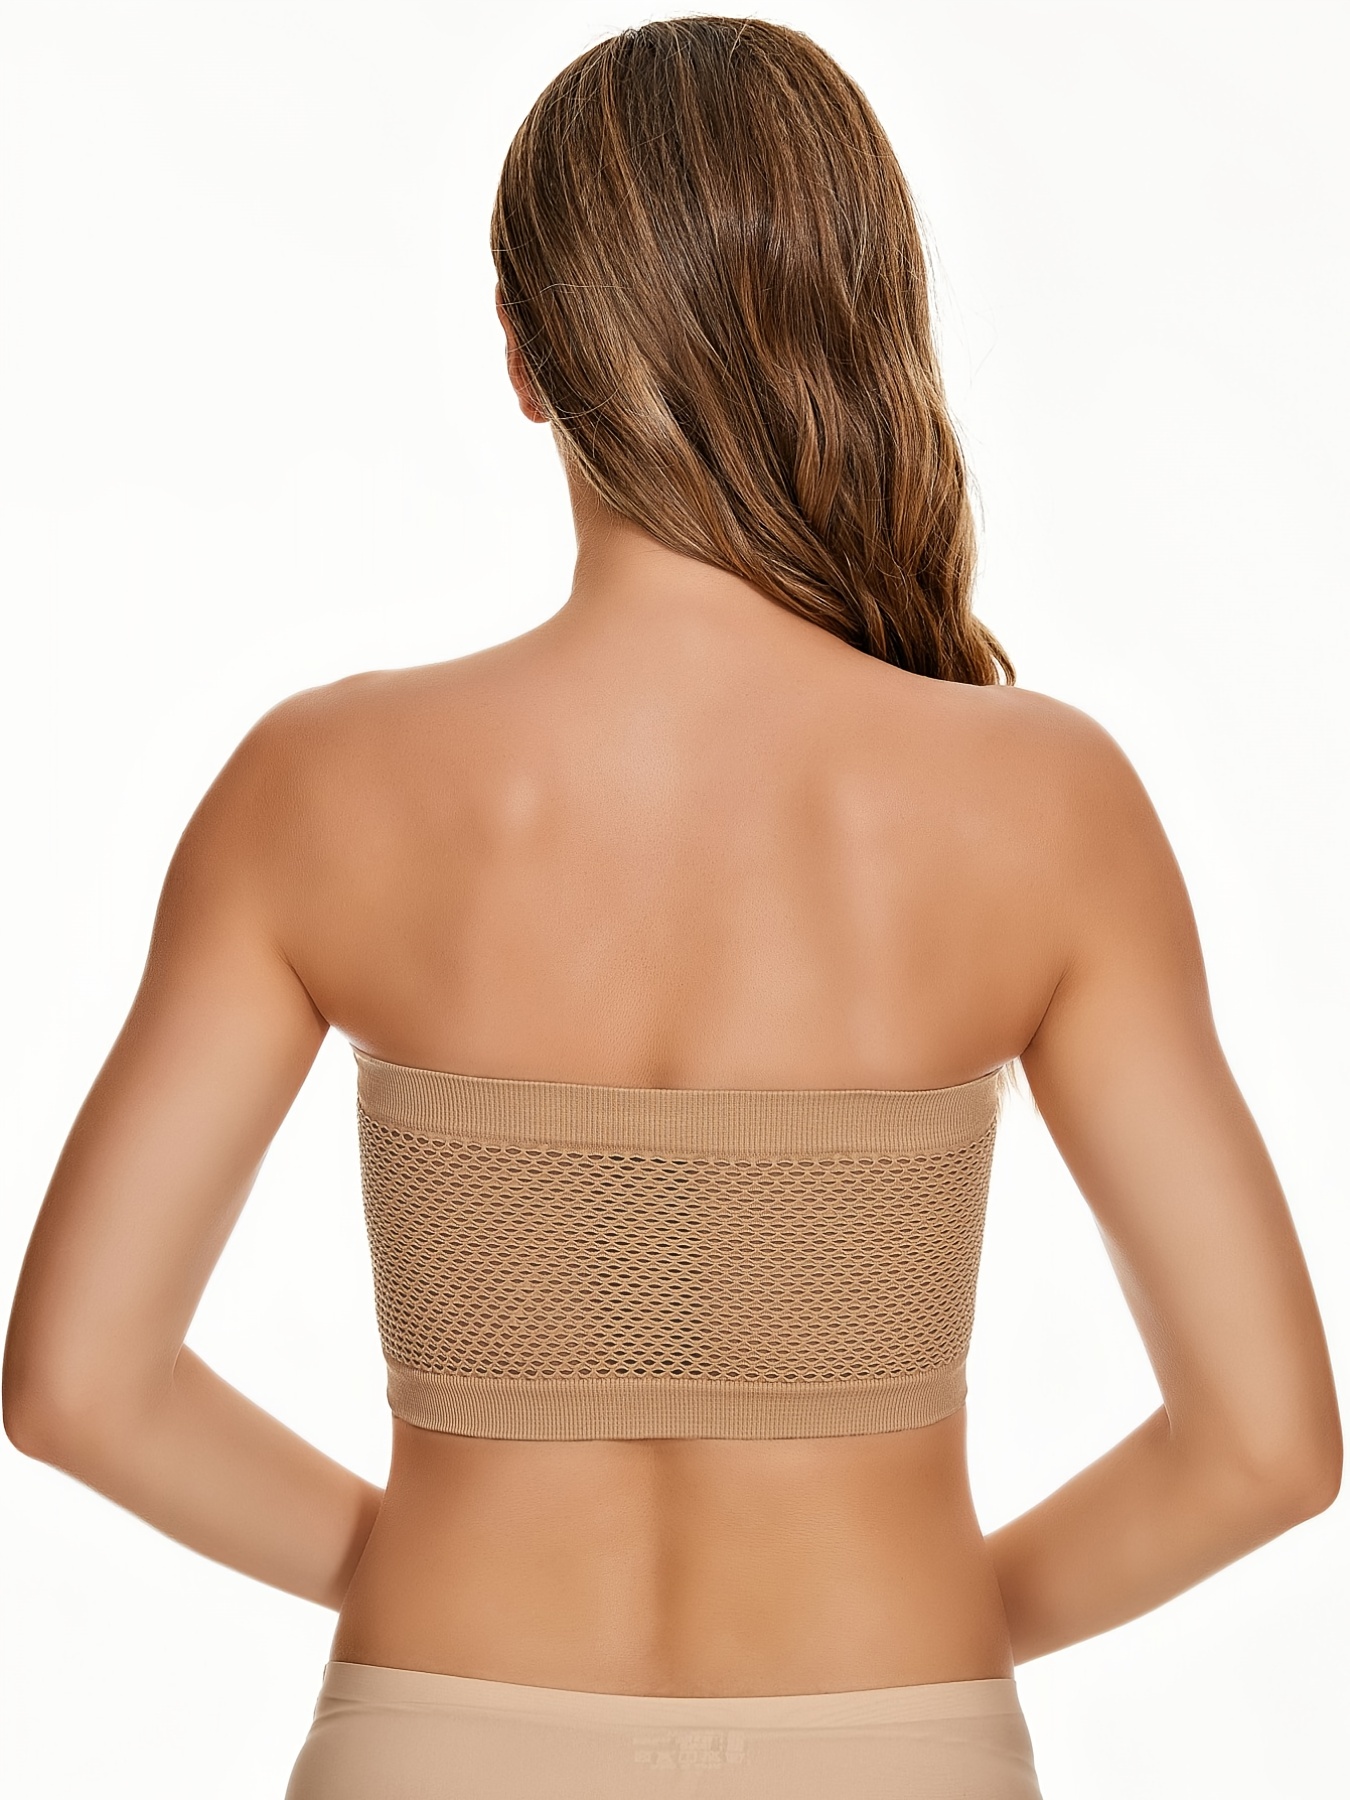 Strapless Bra Seamless Exquisite Underwear Stretchy Appearance Stretchy  Non-Padded Tube Top Bras Good Elasticity Adjustable Lightweight  Underclothes Women S-M 